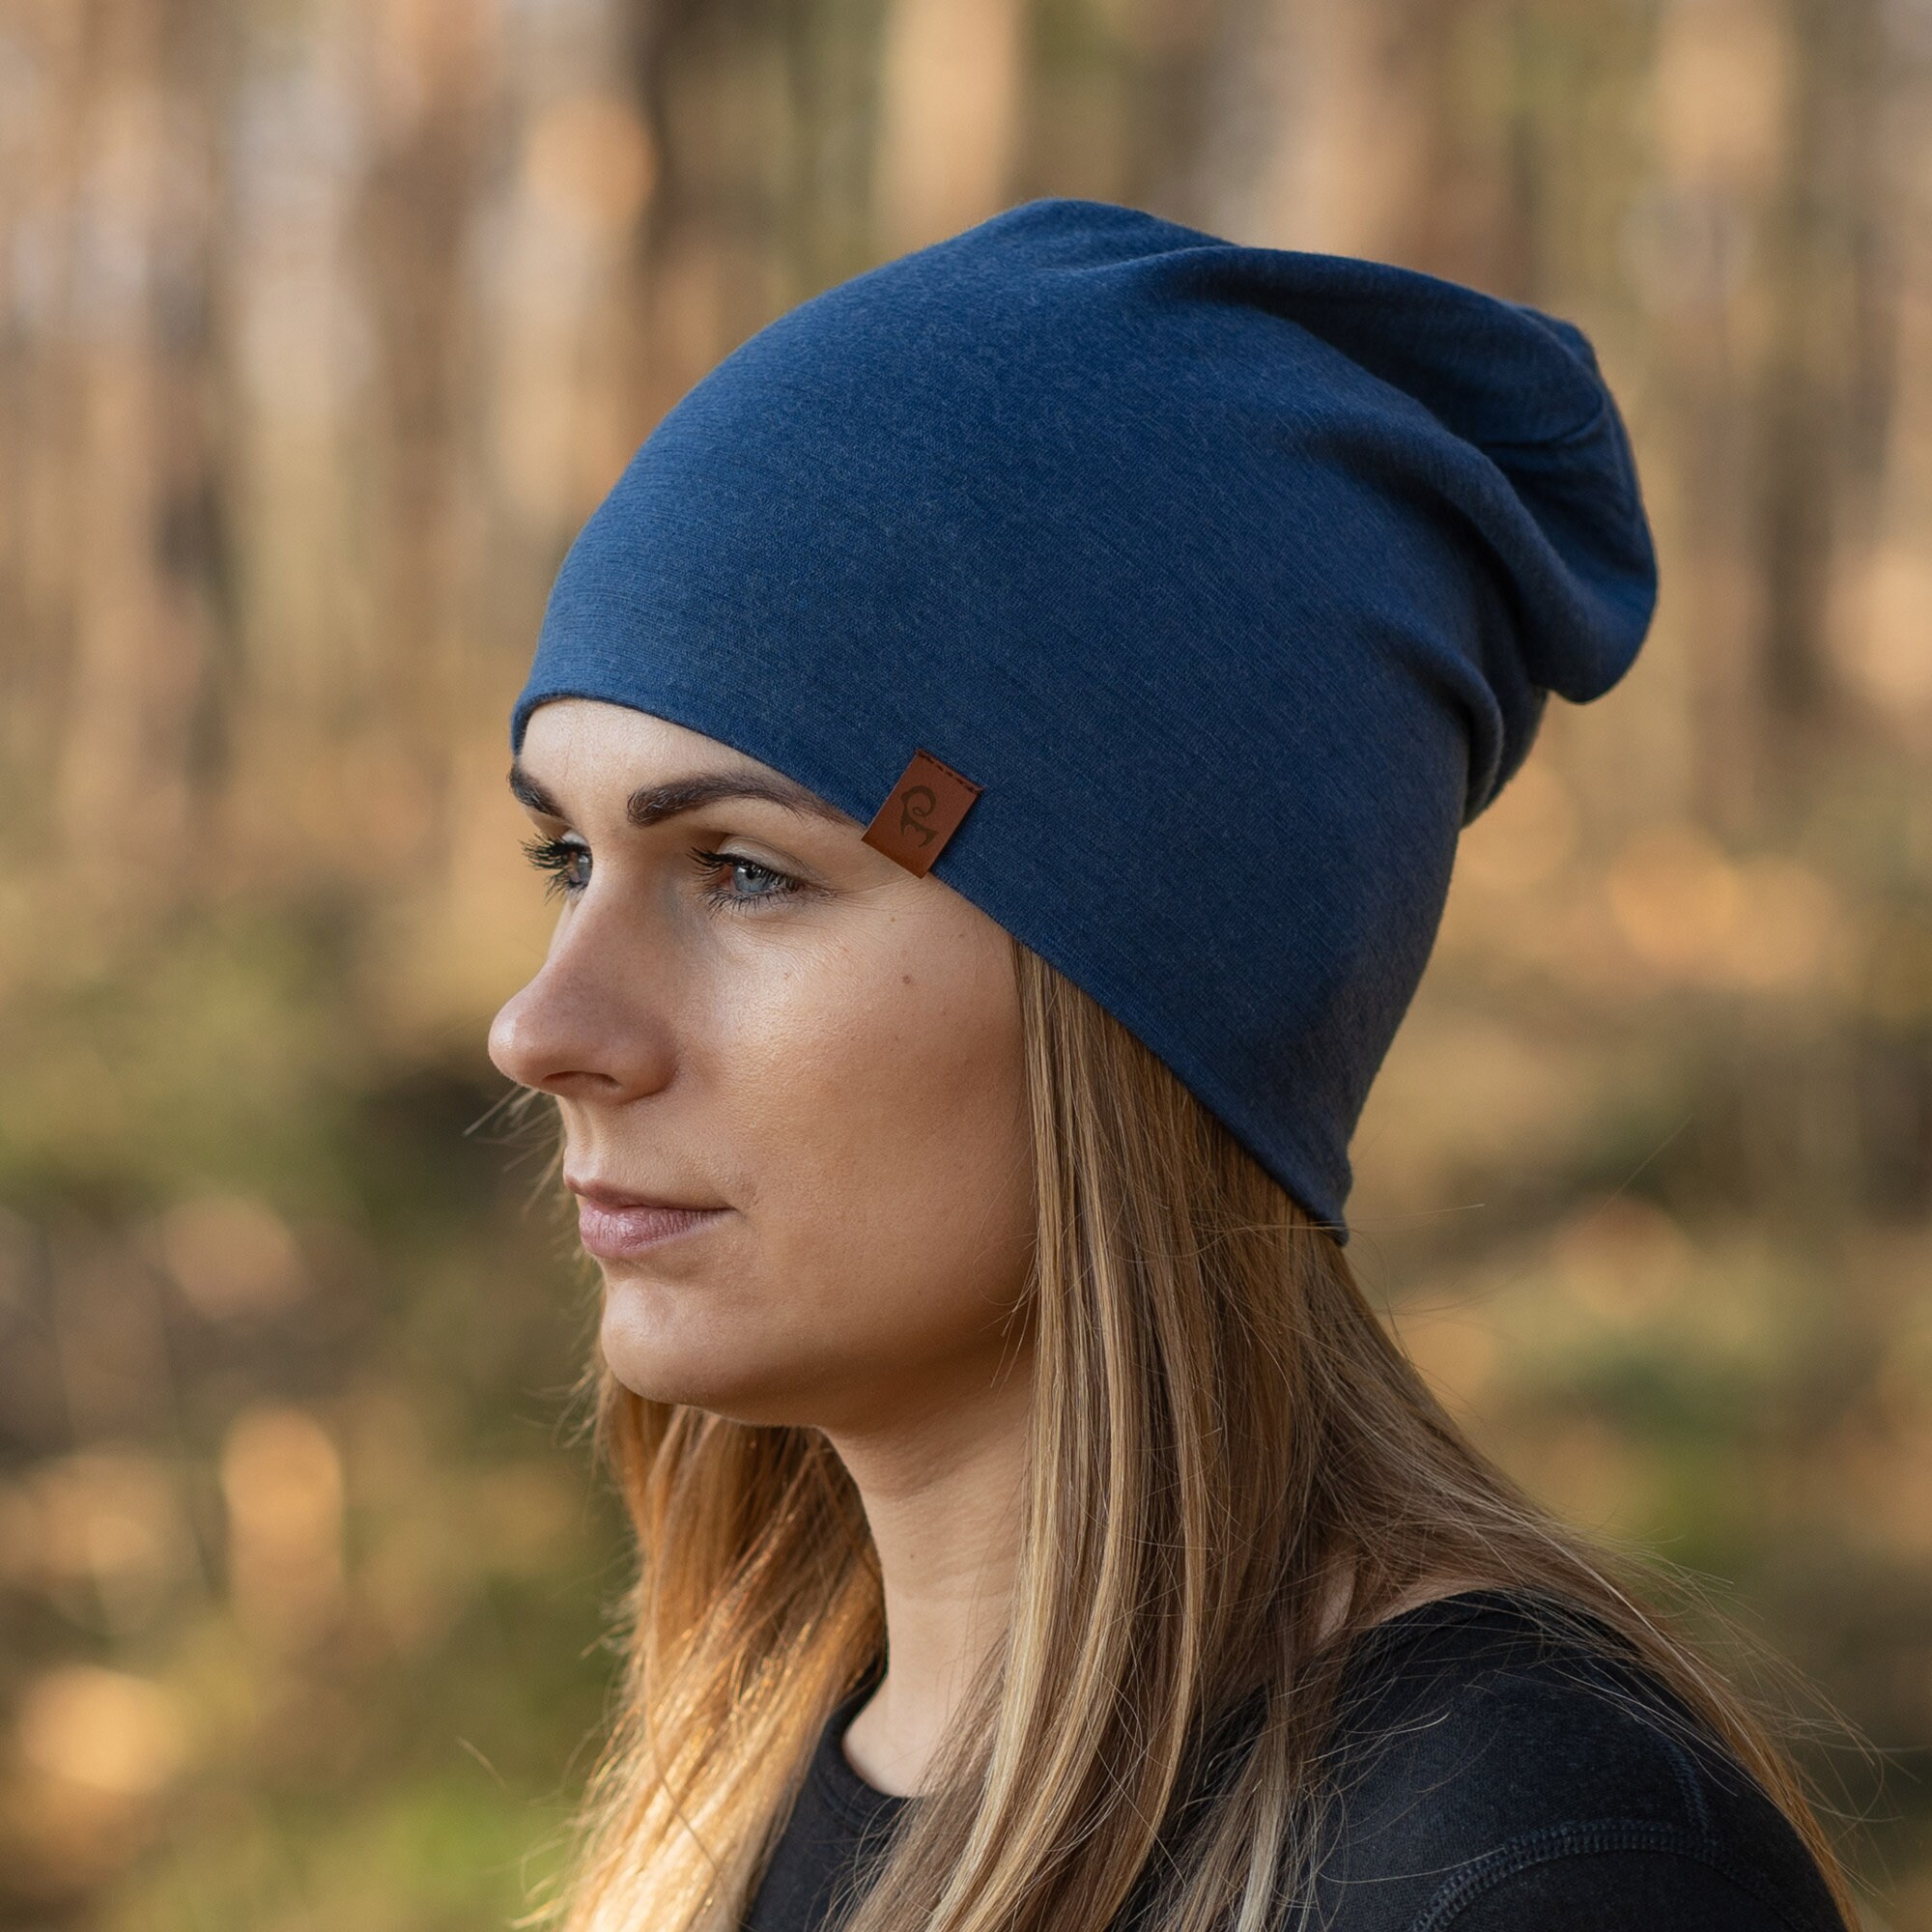 Gifts Wool Outdoor Unisex Women & for Denim Merino Sustainable - Accessories Hat Organic Summer 100% Beanie Slouchy Hat Clothing Men Etsy